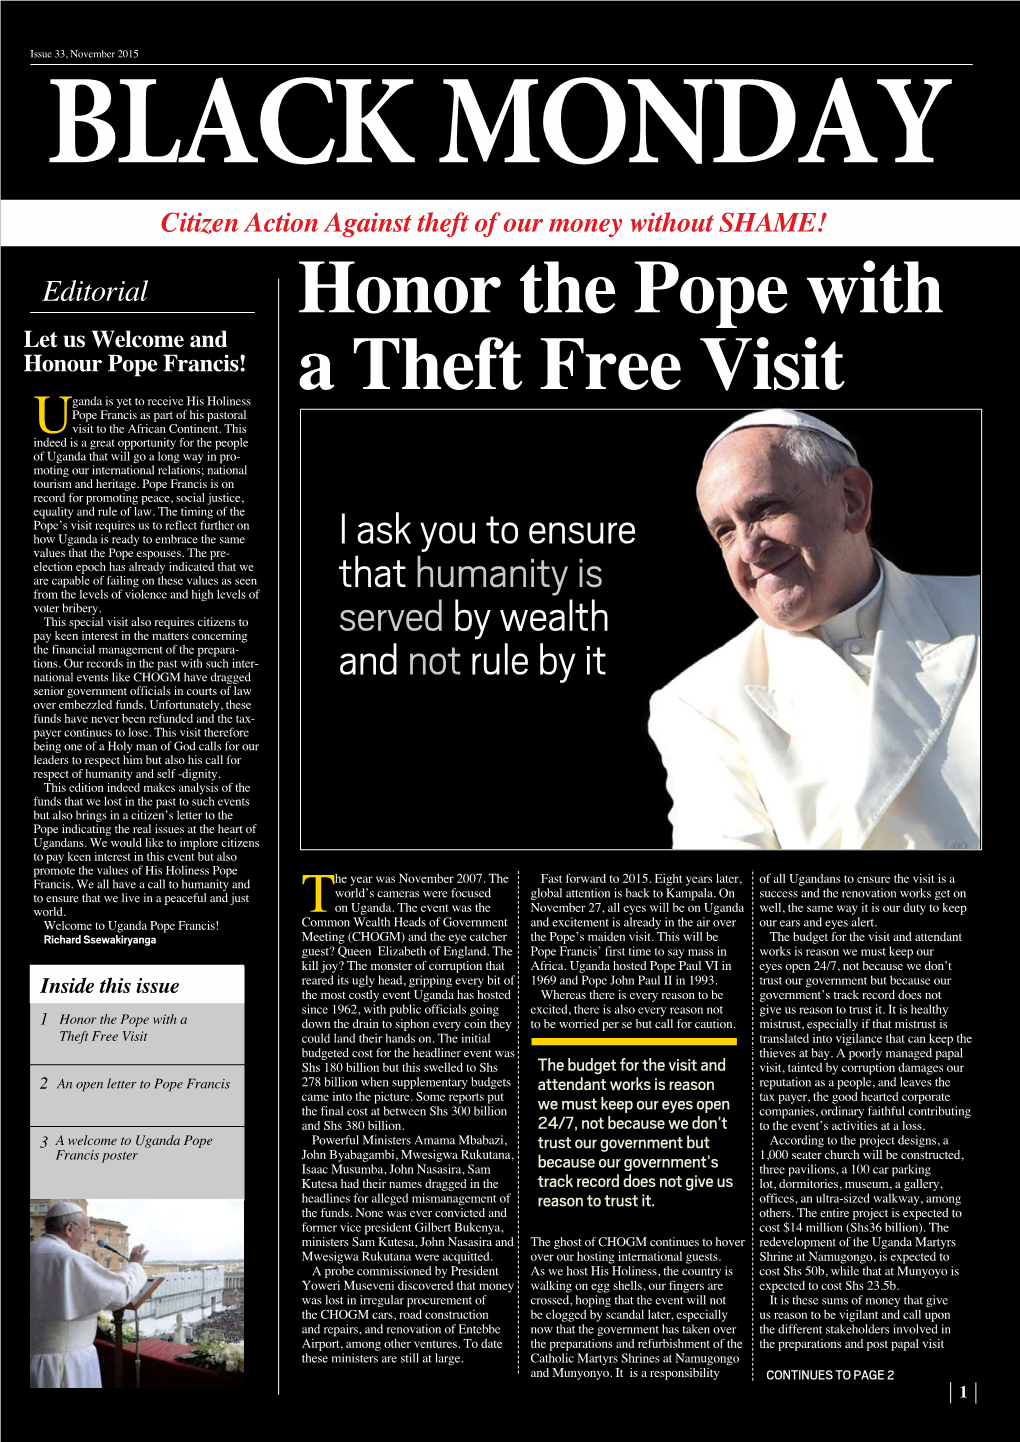 Honor the Pope with a Theft Free Visit from PG 1 Activities Increased